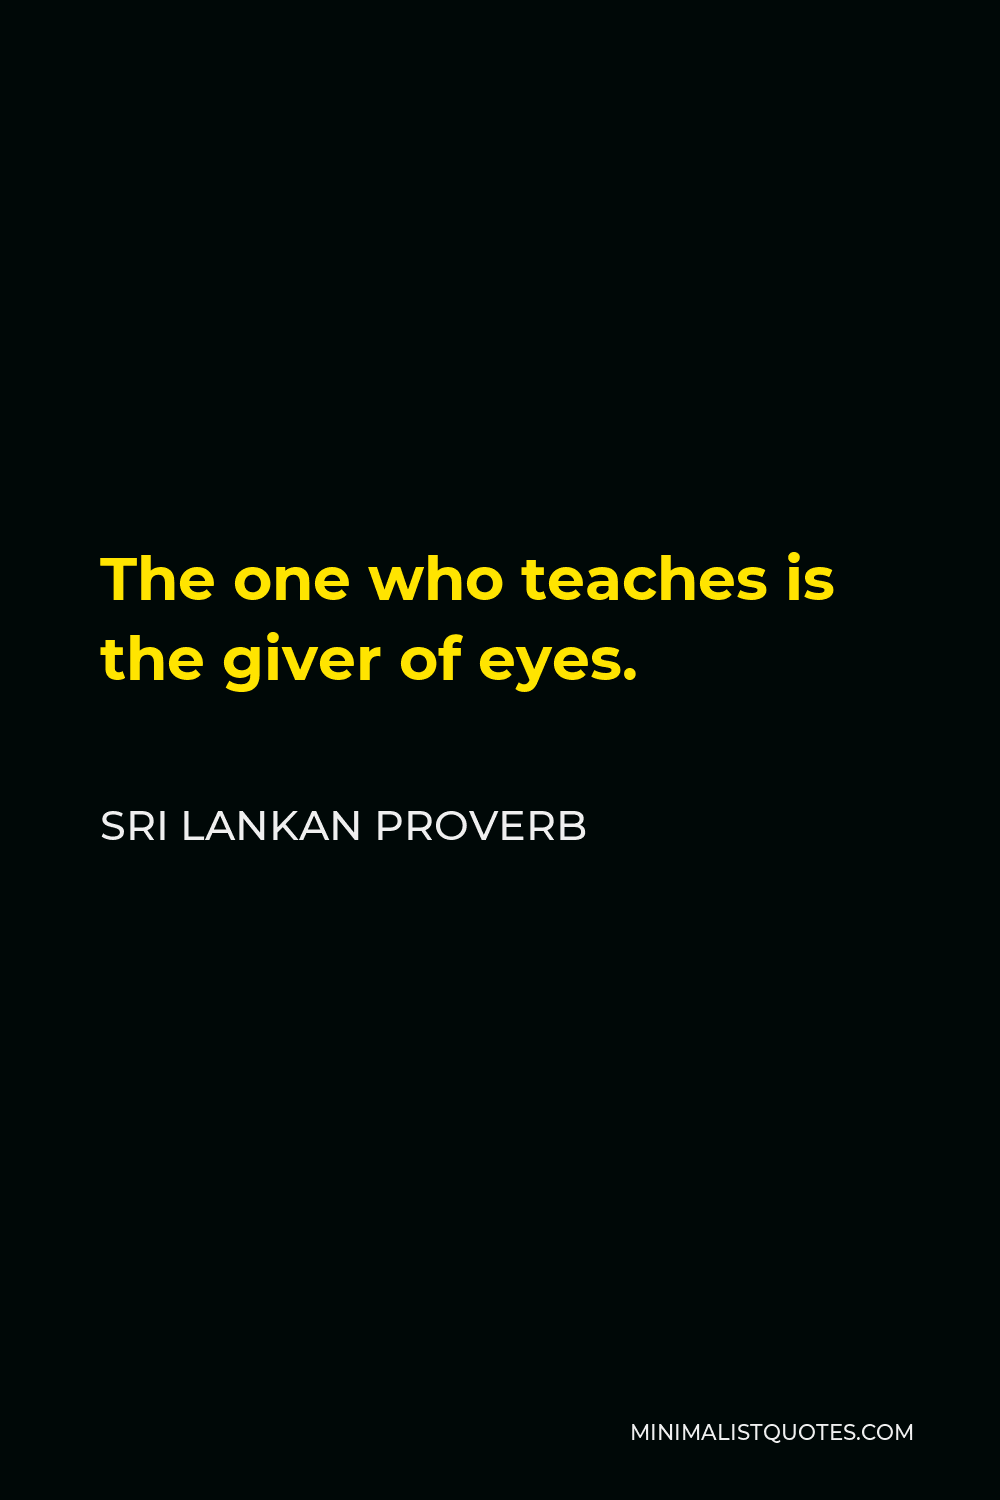 Sri Lankan Proverb Quote - The one who teaches is the giver of eyes.